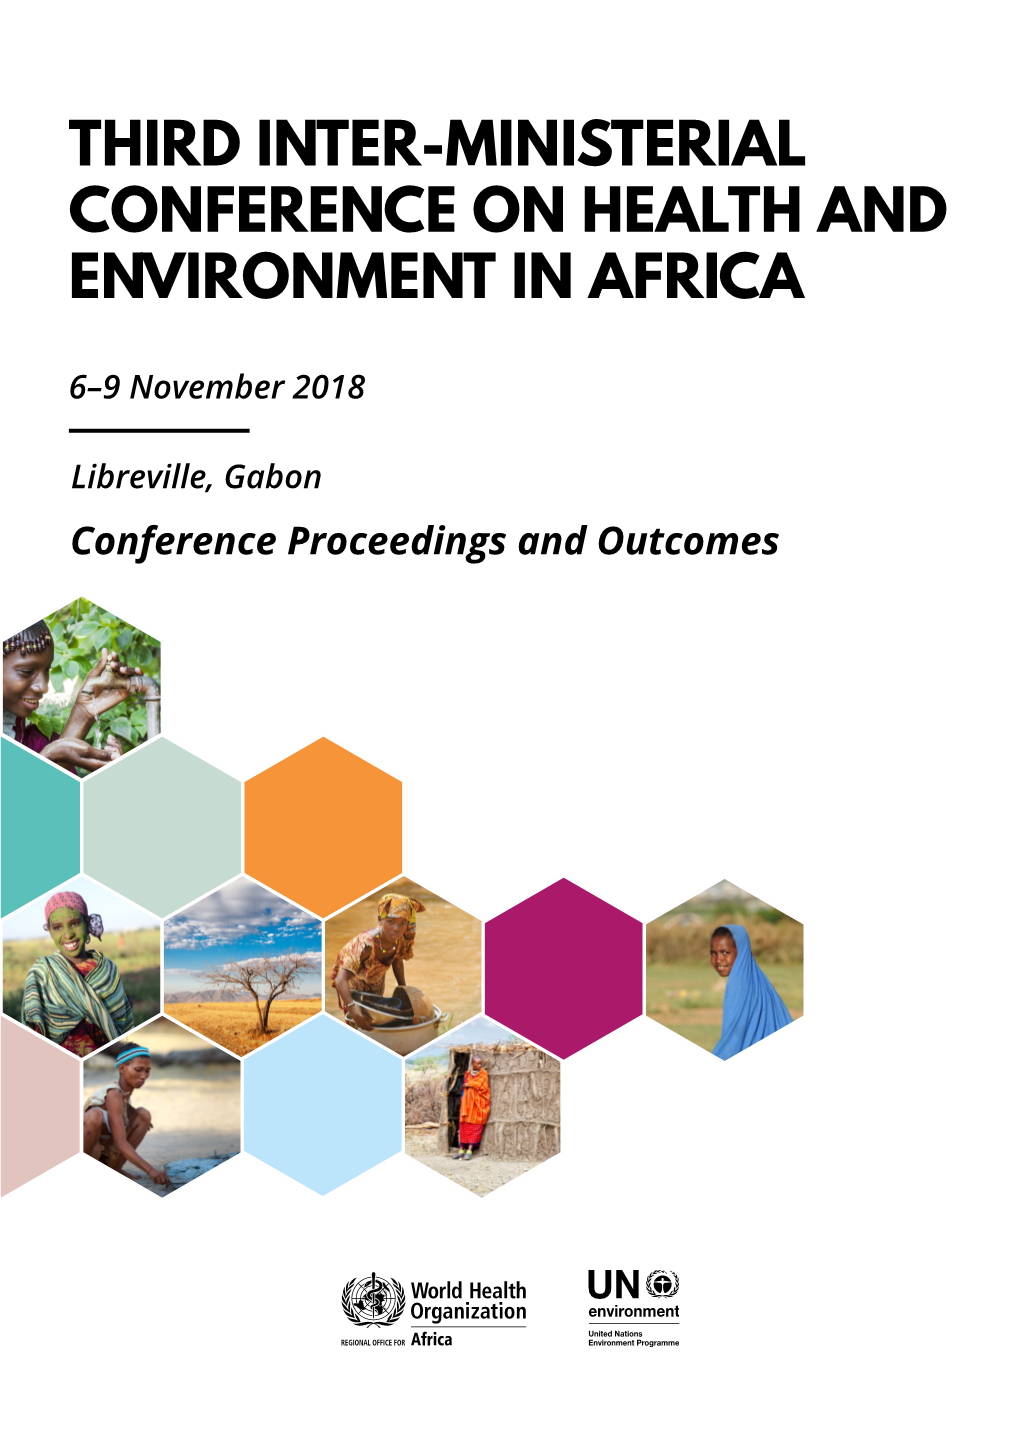 Third Inter-Ministerial Conference on Health and Environment in Africa